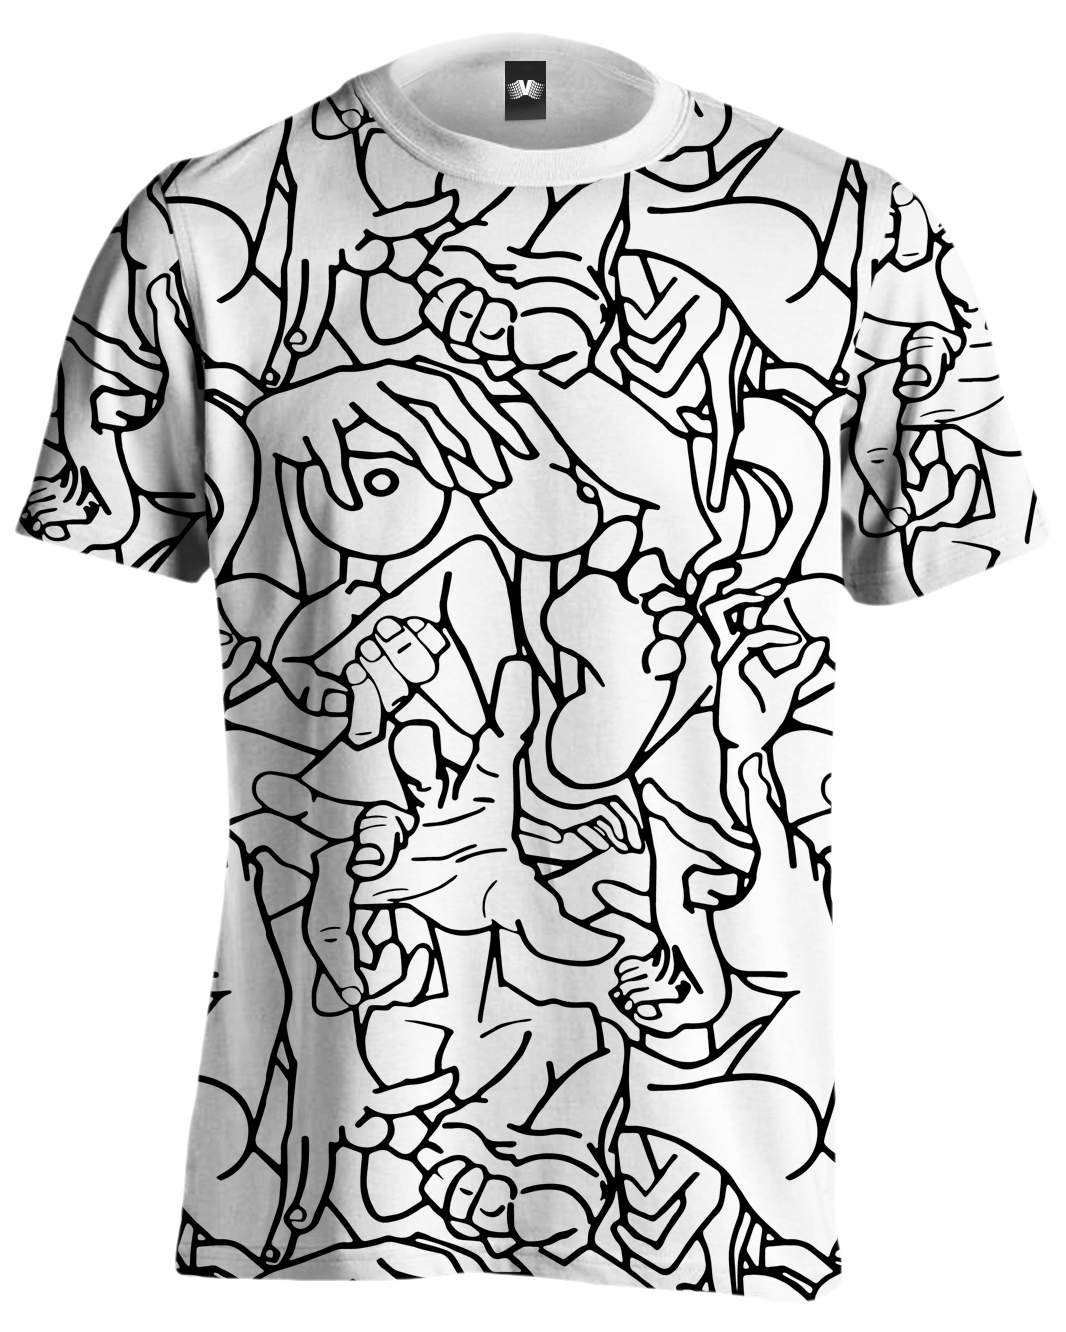 Tight Spaces Tee All Over Print Tee AOP XS White 